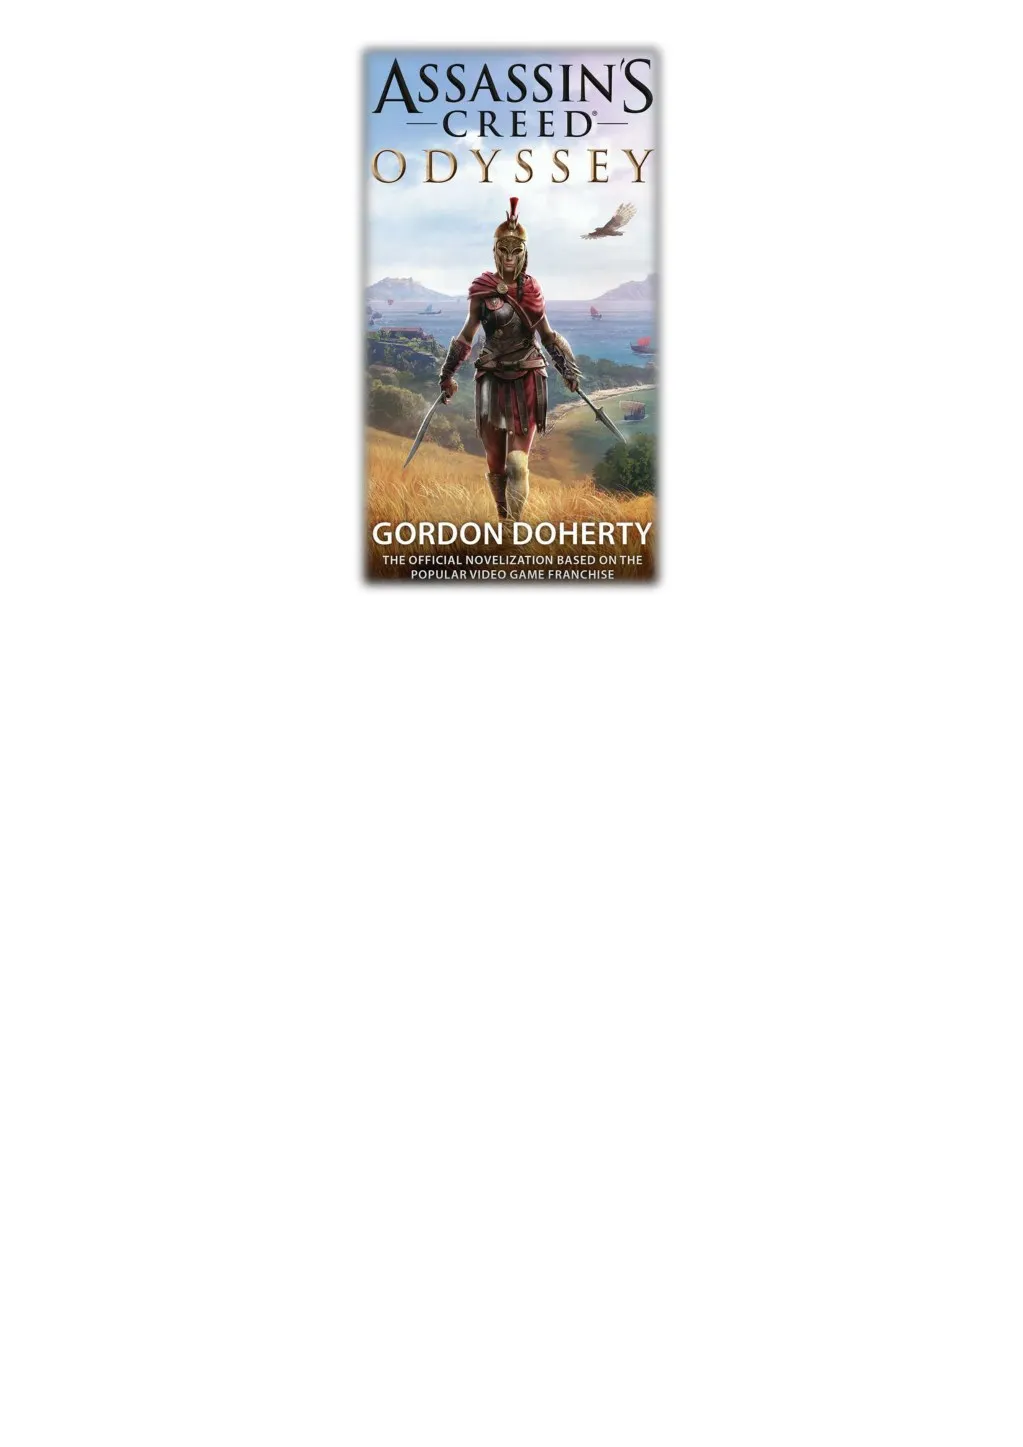 Ppt Pdf Free Download Assassin S Creed Odyssey By Gordon Doherty Powerpoint Presentation Id